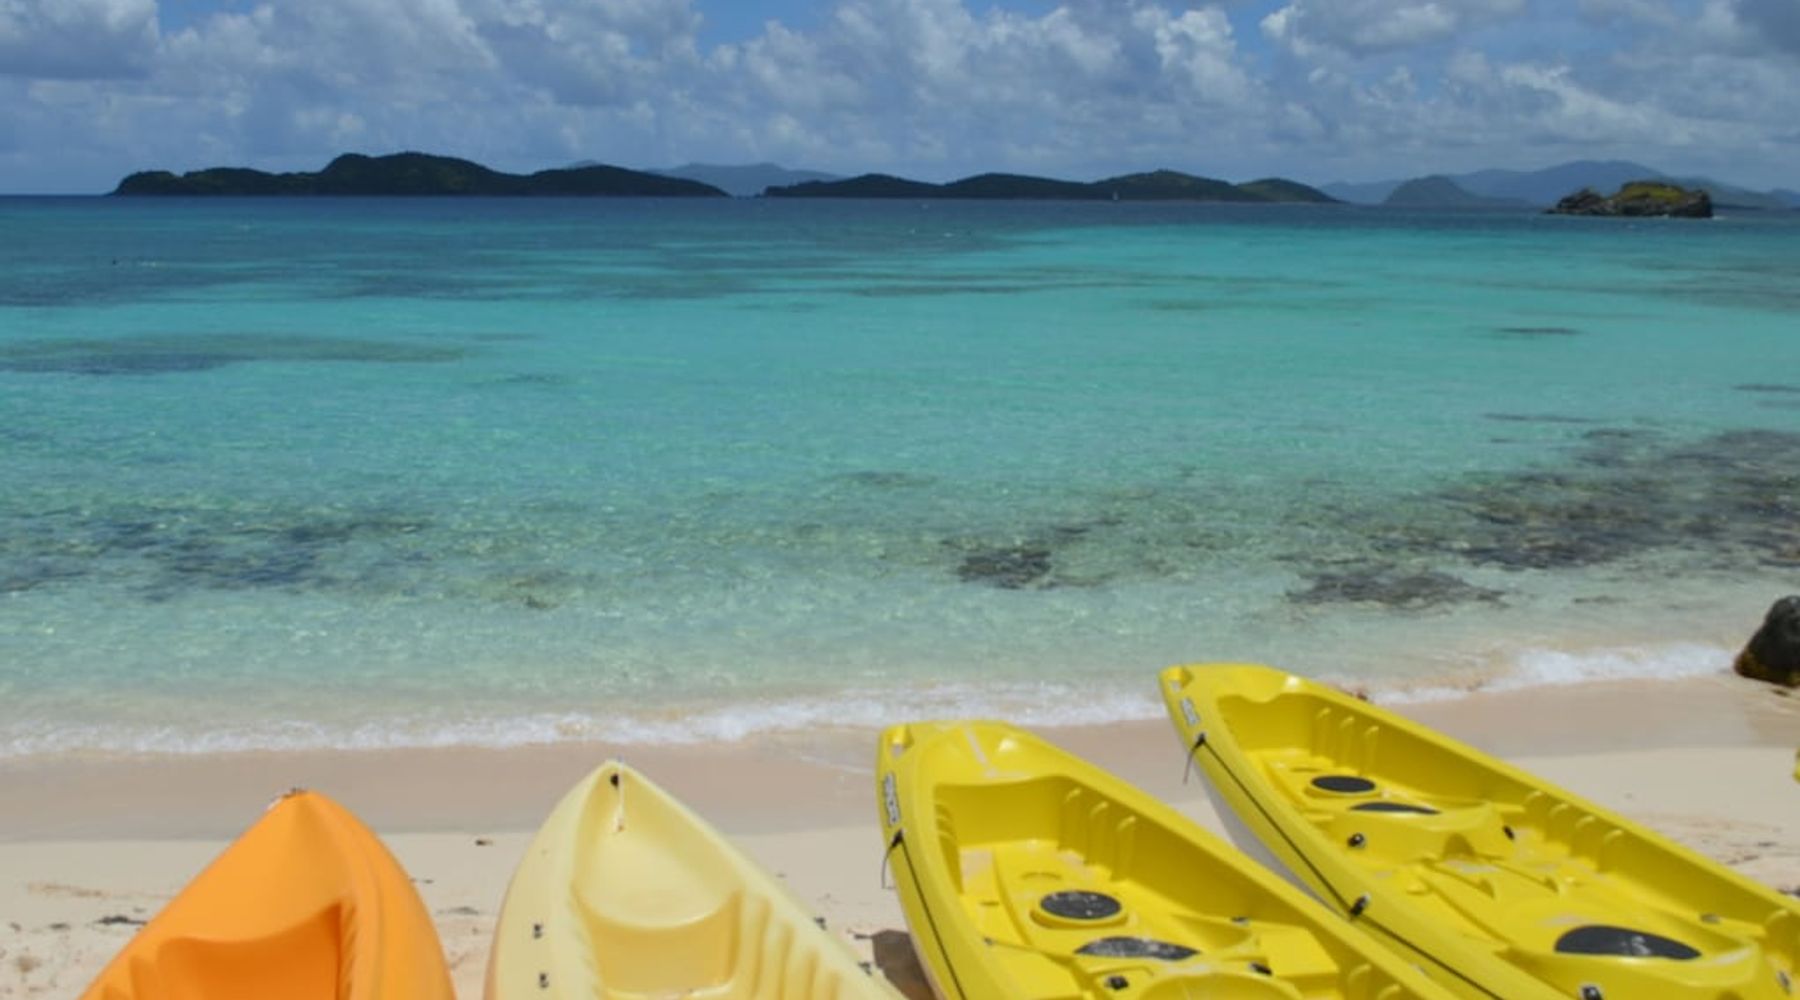 Kayaks may be rented directly on Sapphire Beach.